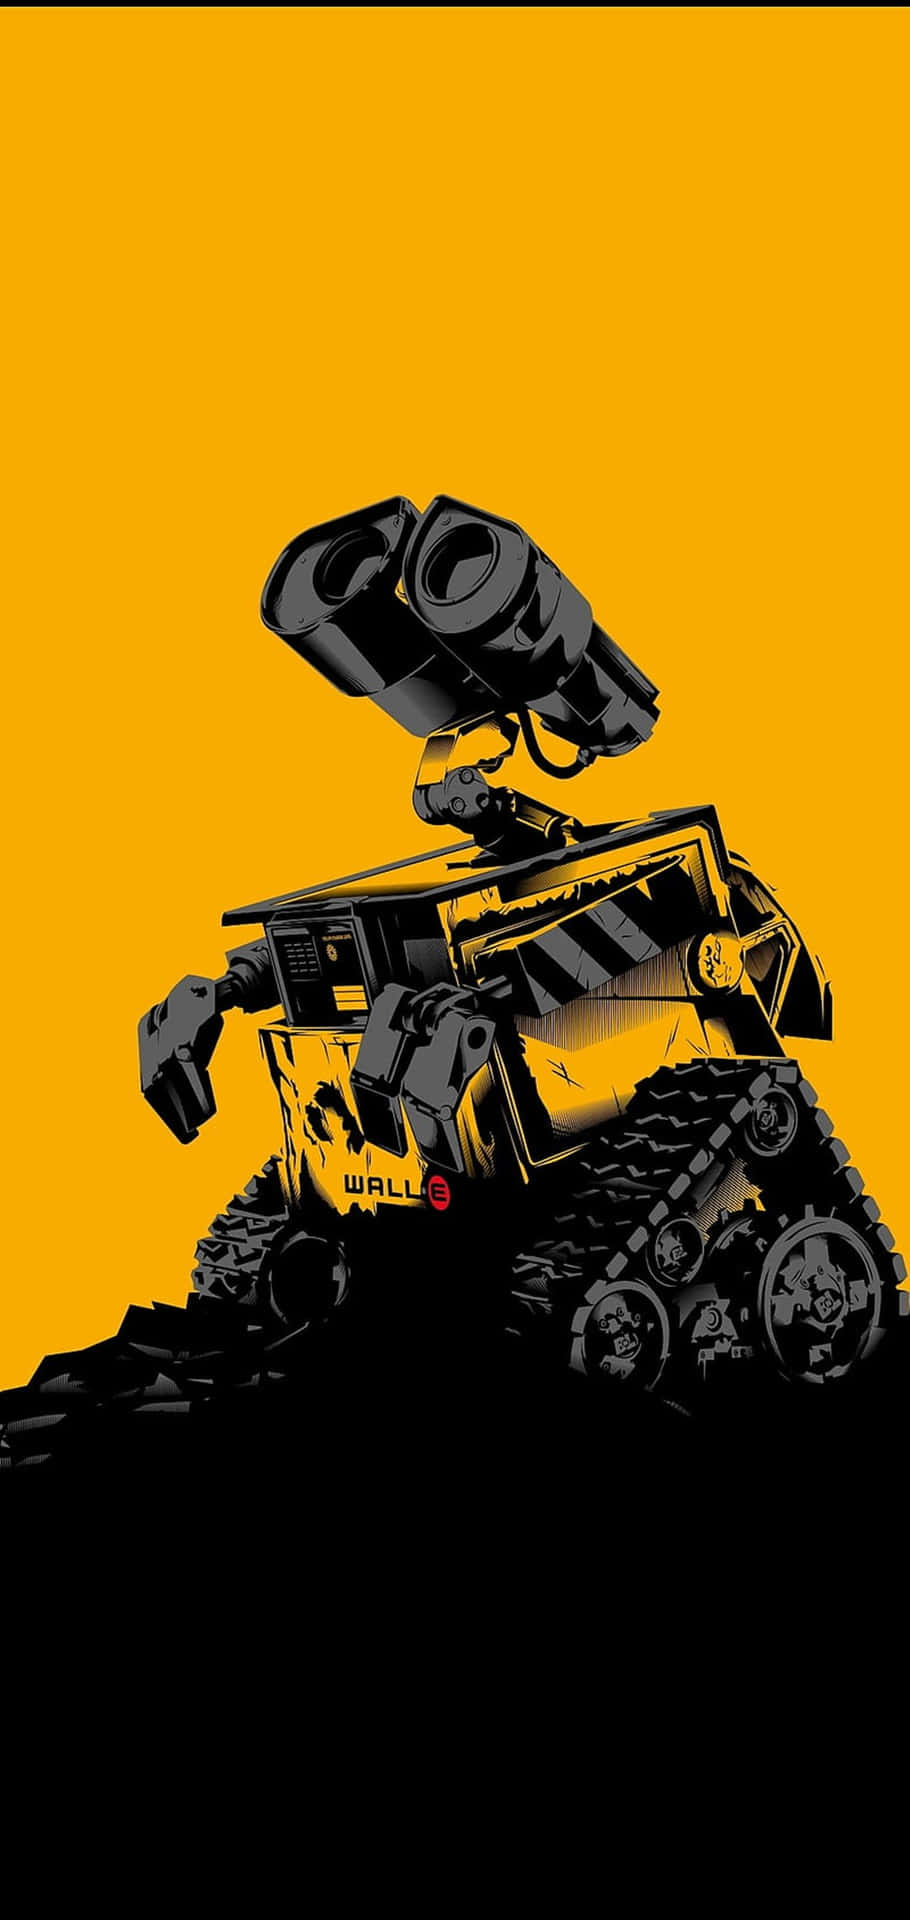 A Black And Yellow Vehicle With A Gun On It Background